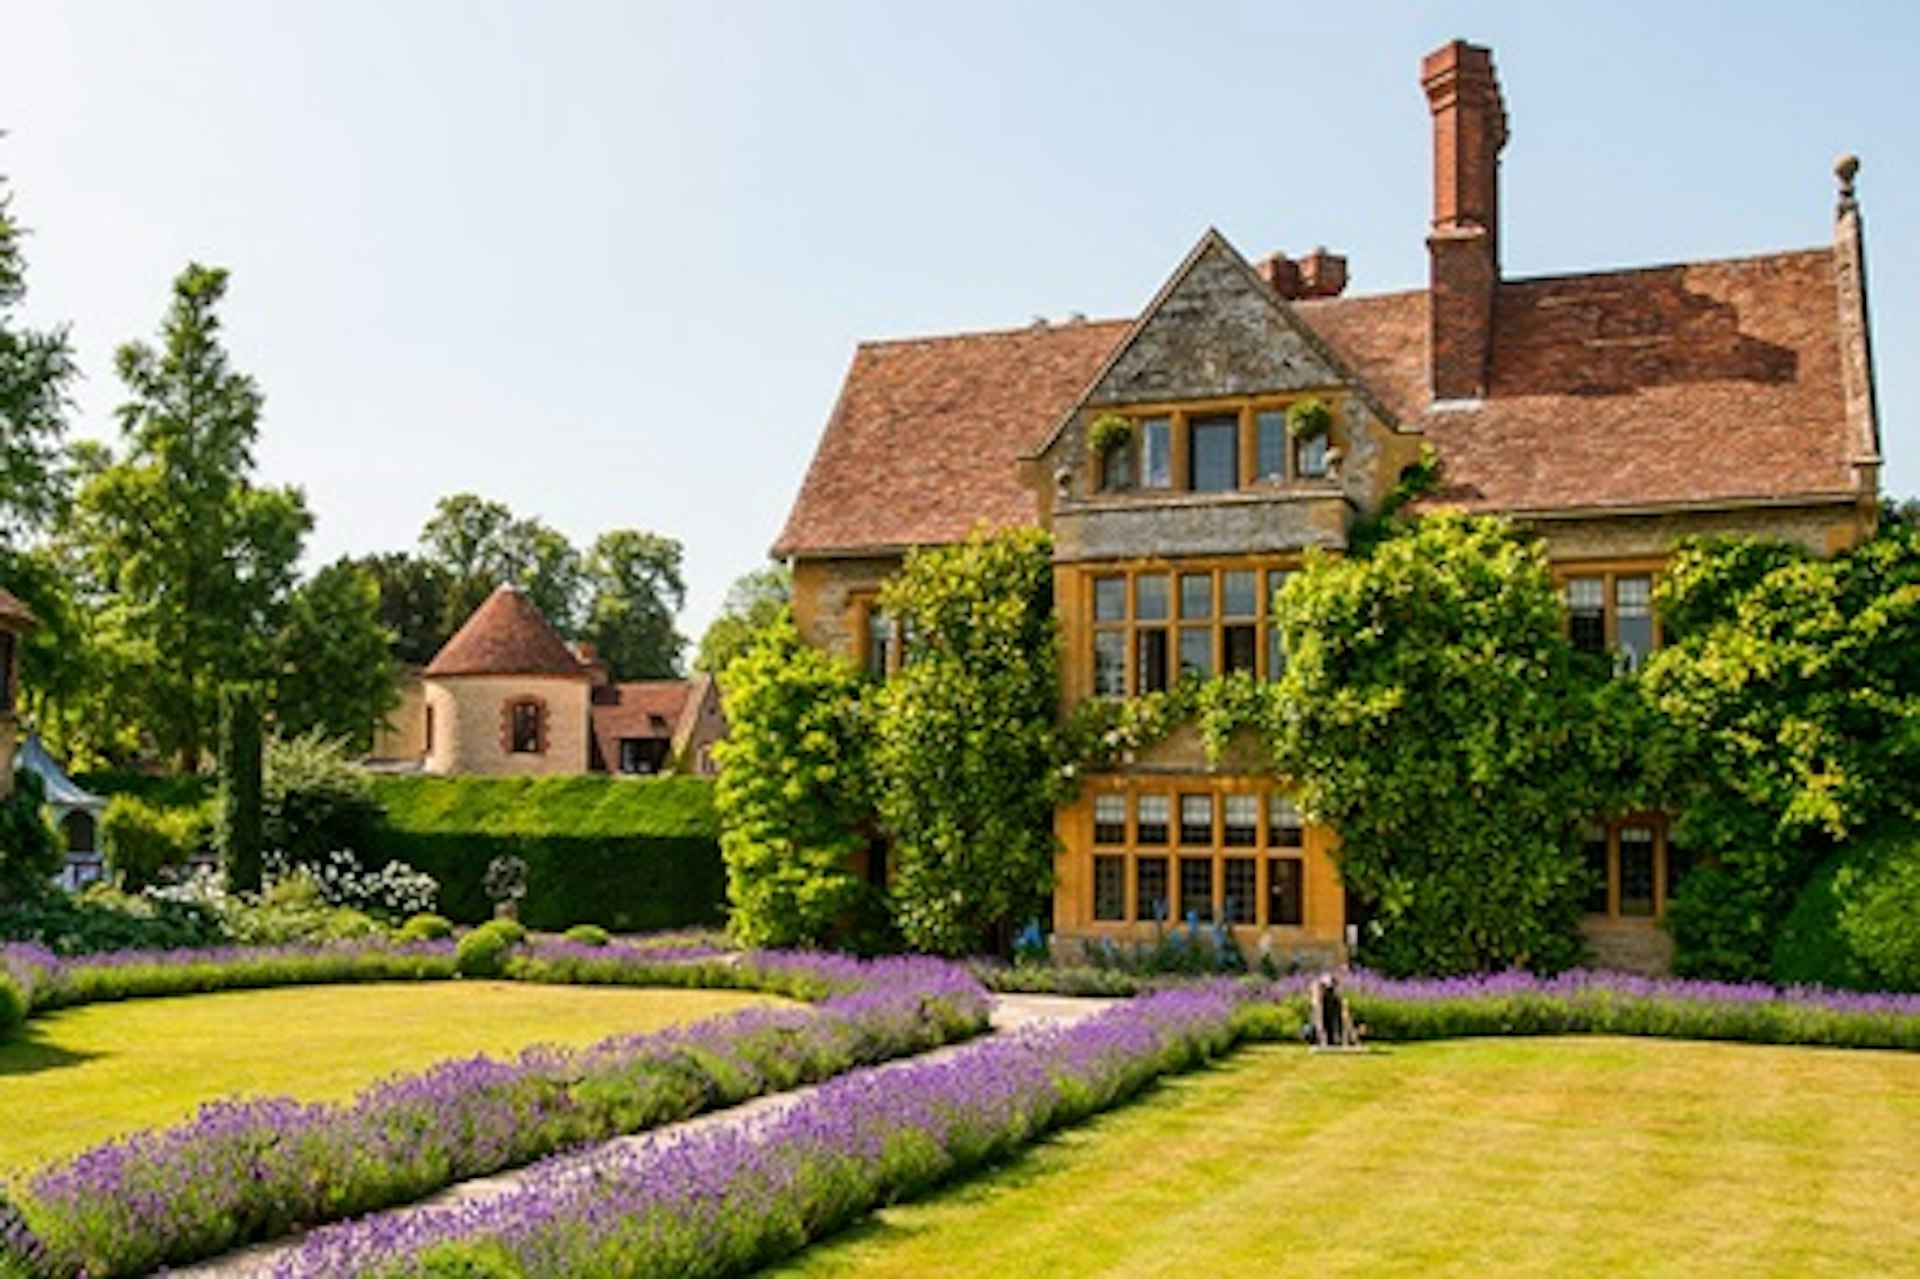 Half Day Course at the Raymond Blanc Cookery School at Belmond Le Manoir 1